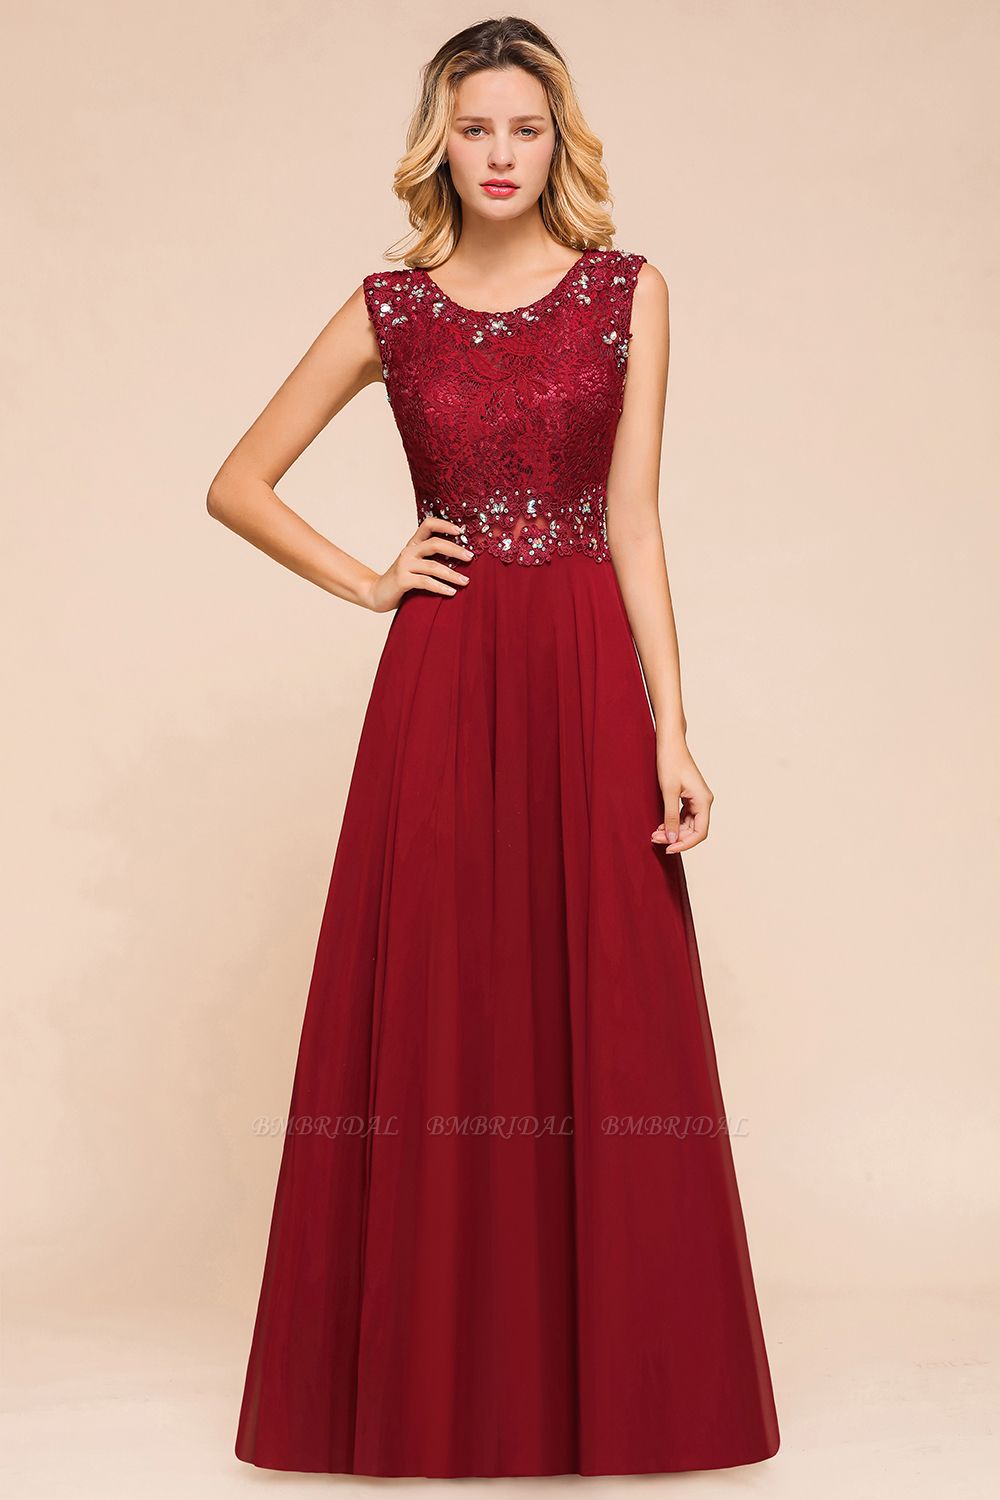 BMbridal Burgundy Lace Long Prom Dresses Sleeveless Chiffon Evening Gowns With Crystal